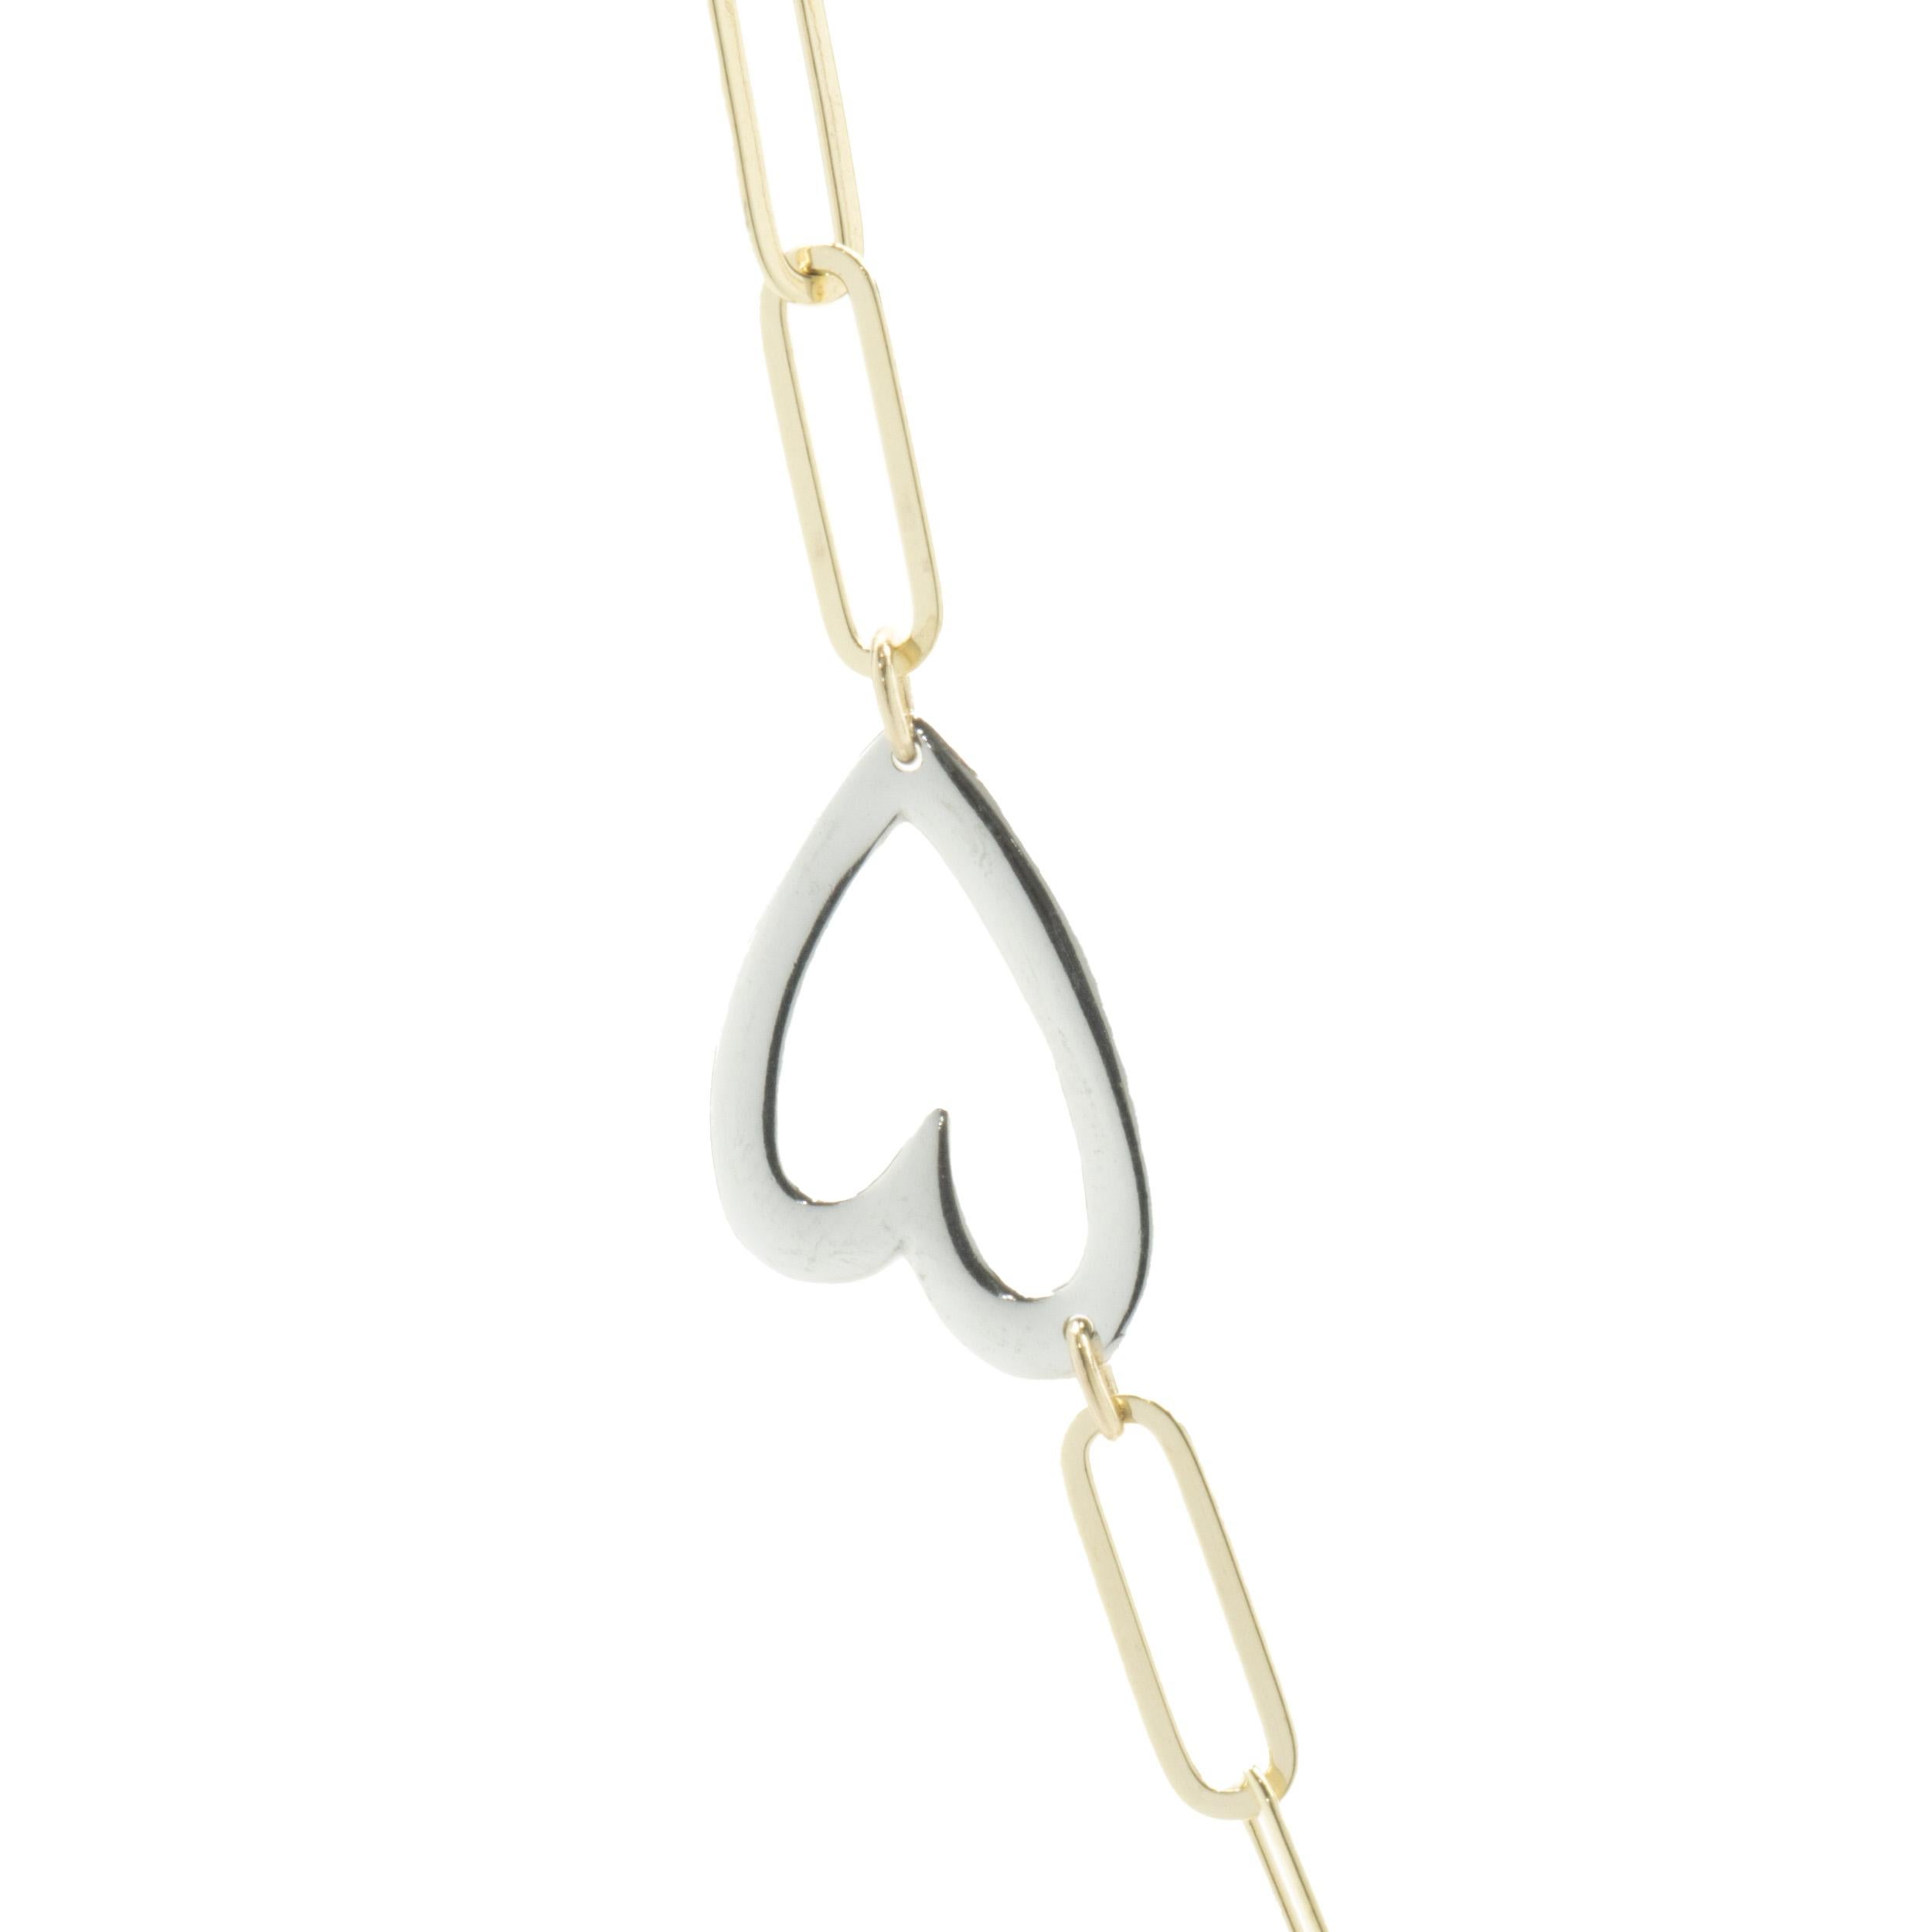 Designer: custom
Material: 14K yellow & white gold 
Dimensions: necklace measures 22-inches in length
Weight: 14.80 grams